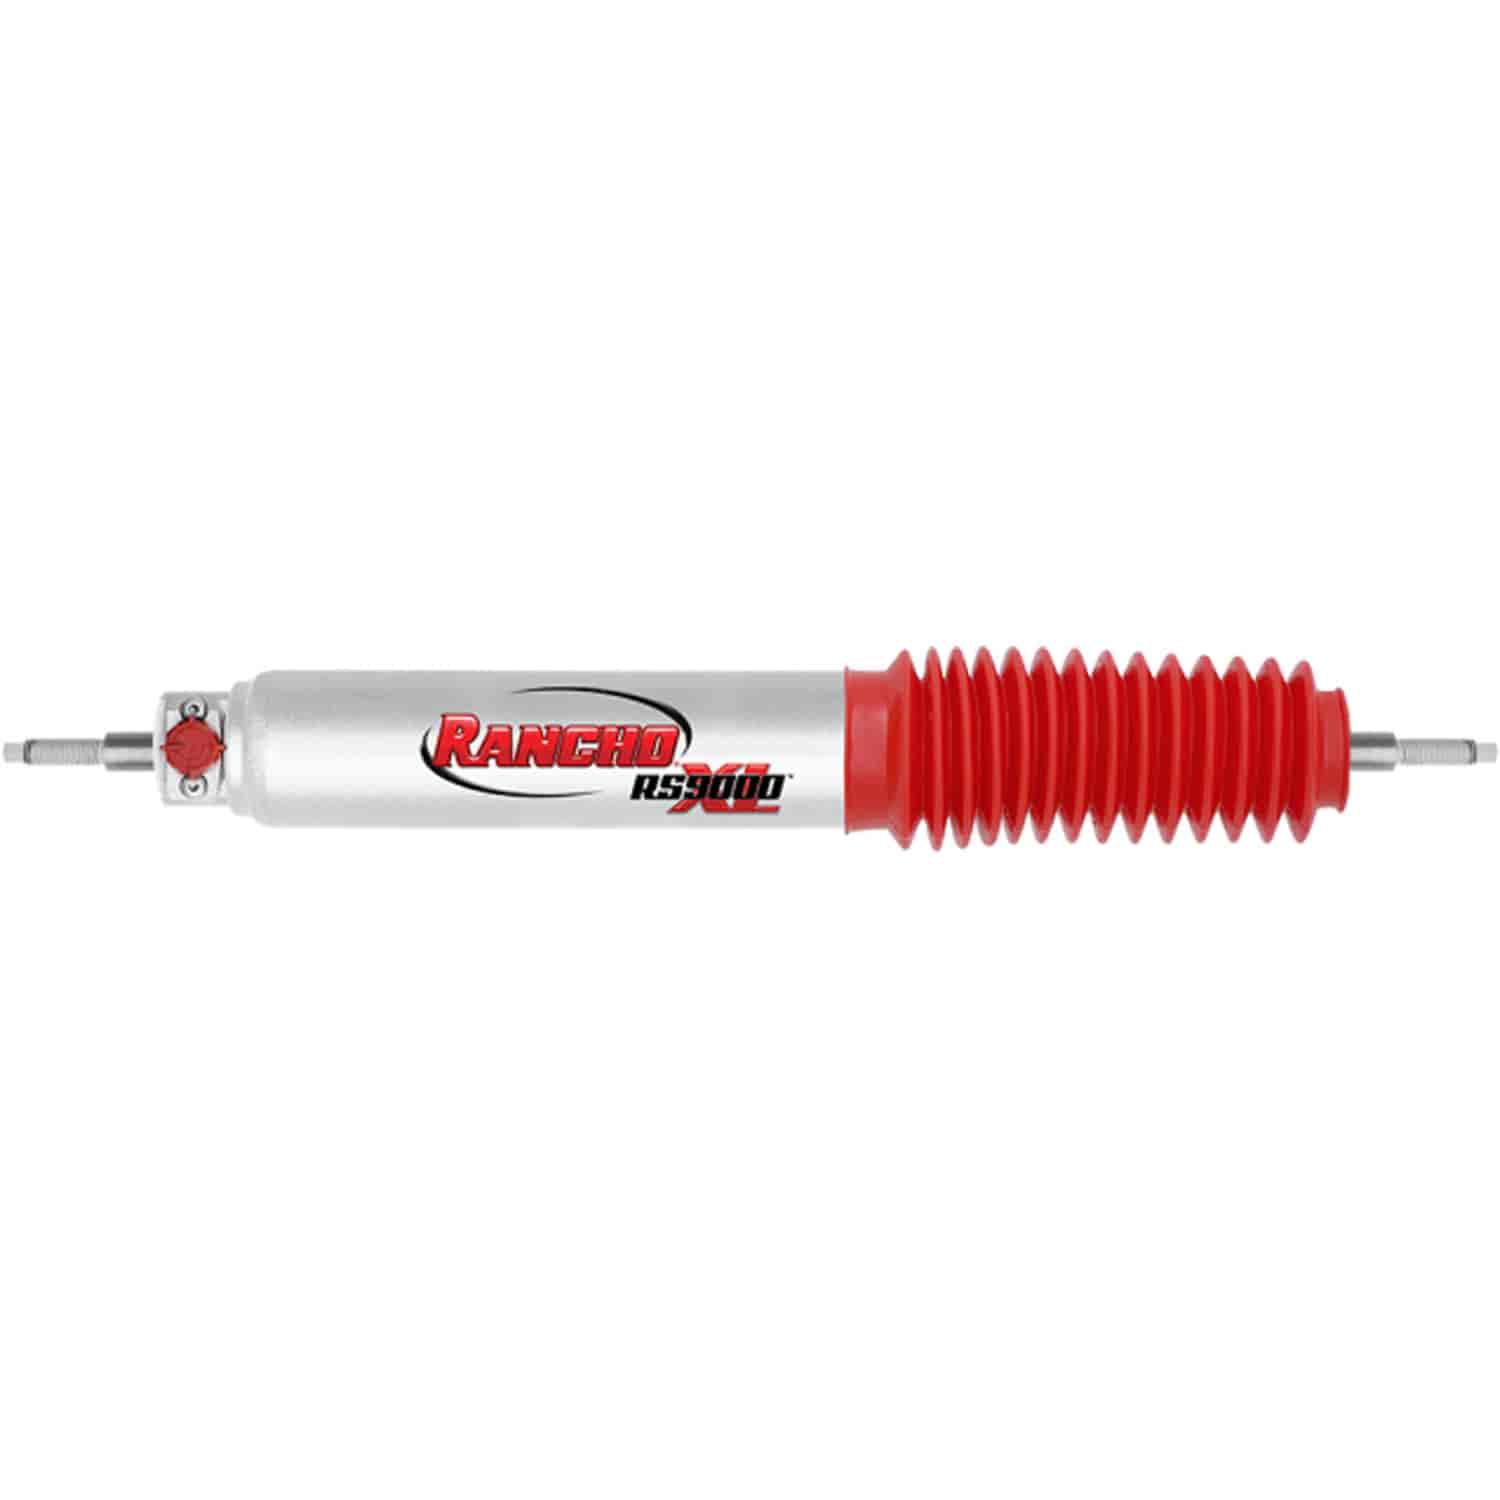 RS9000XL Front Shock Absorber Fits Toyota Land Cruiser